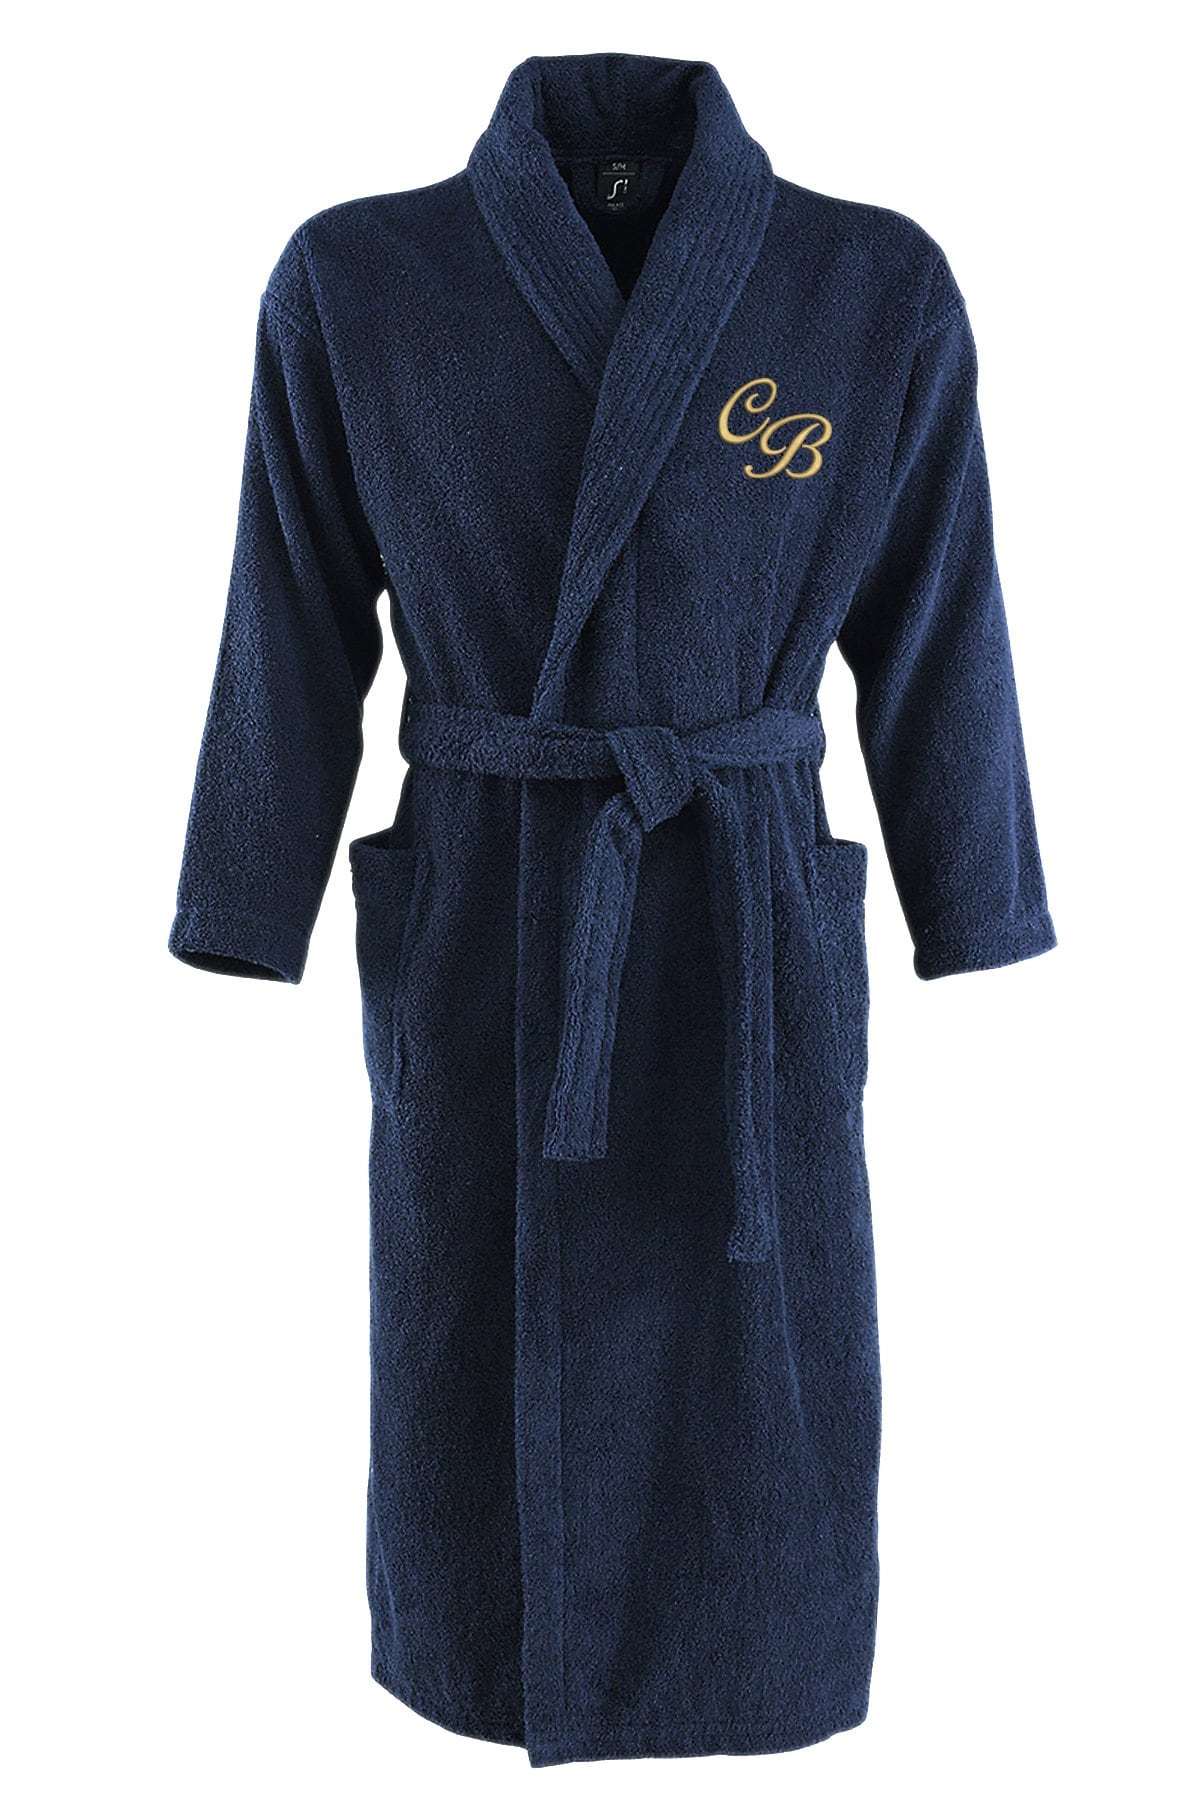 Bathrobe Dressing Gown Embroidered With Your Initials Monogram - Etsy Israel